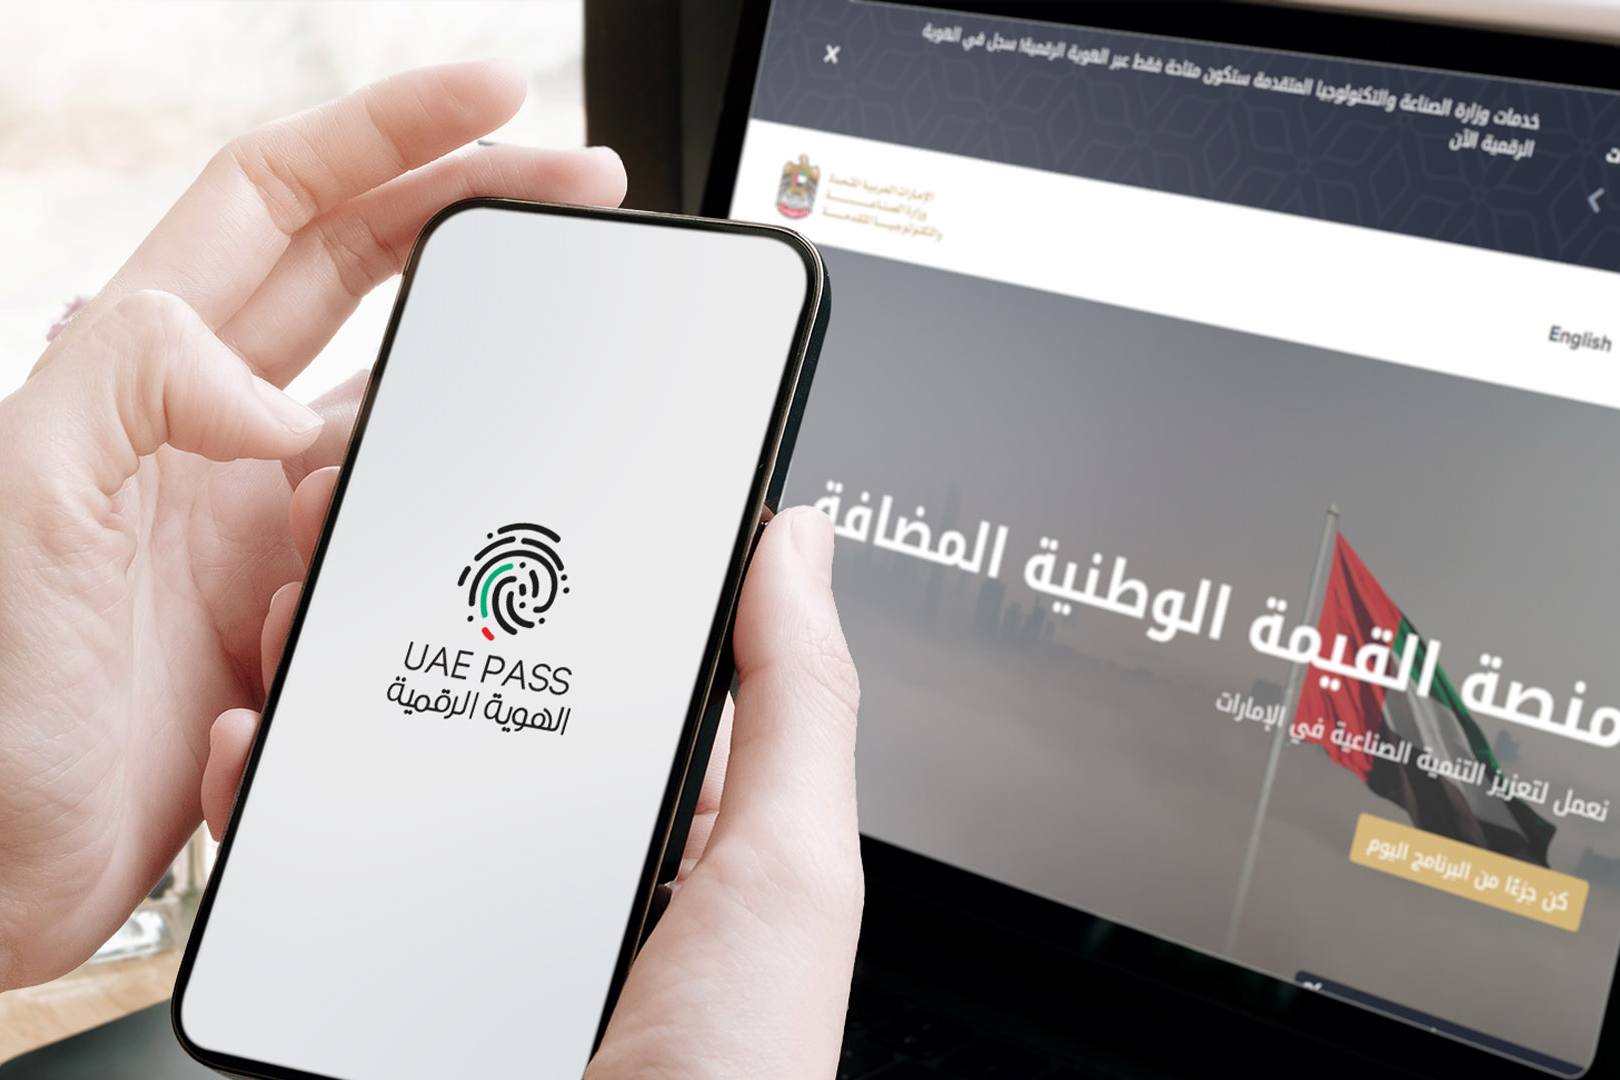 The Ministry of Interior offers car and license services that can be achieved with UAE Pass.